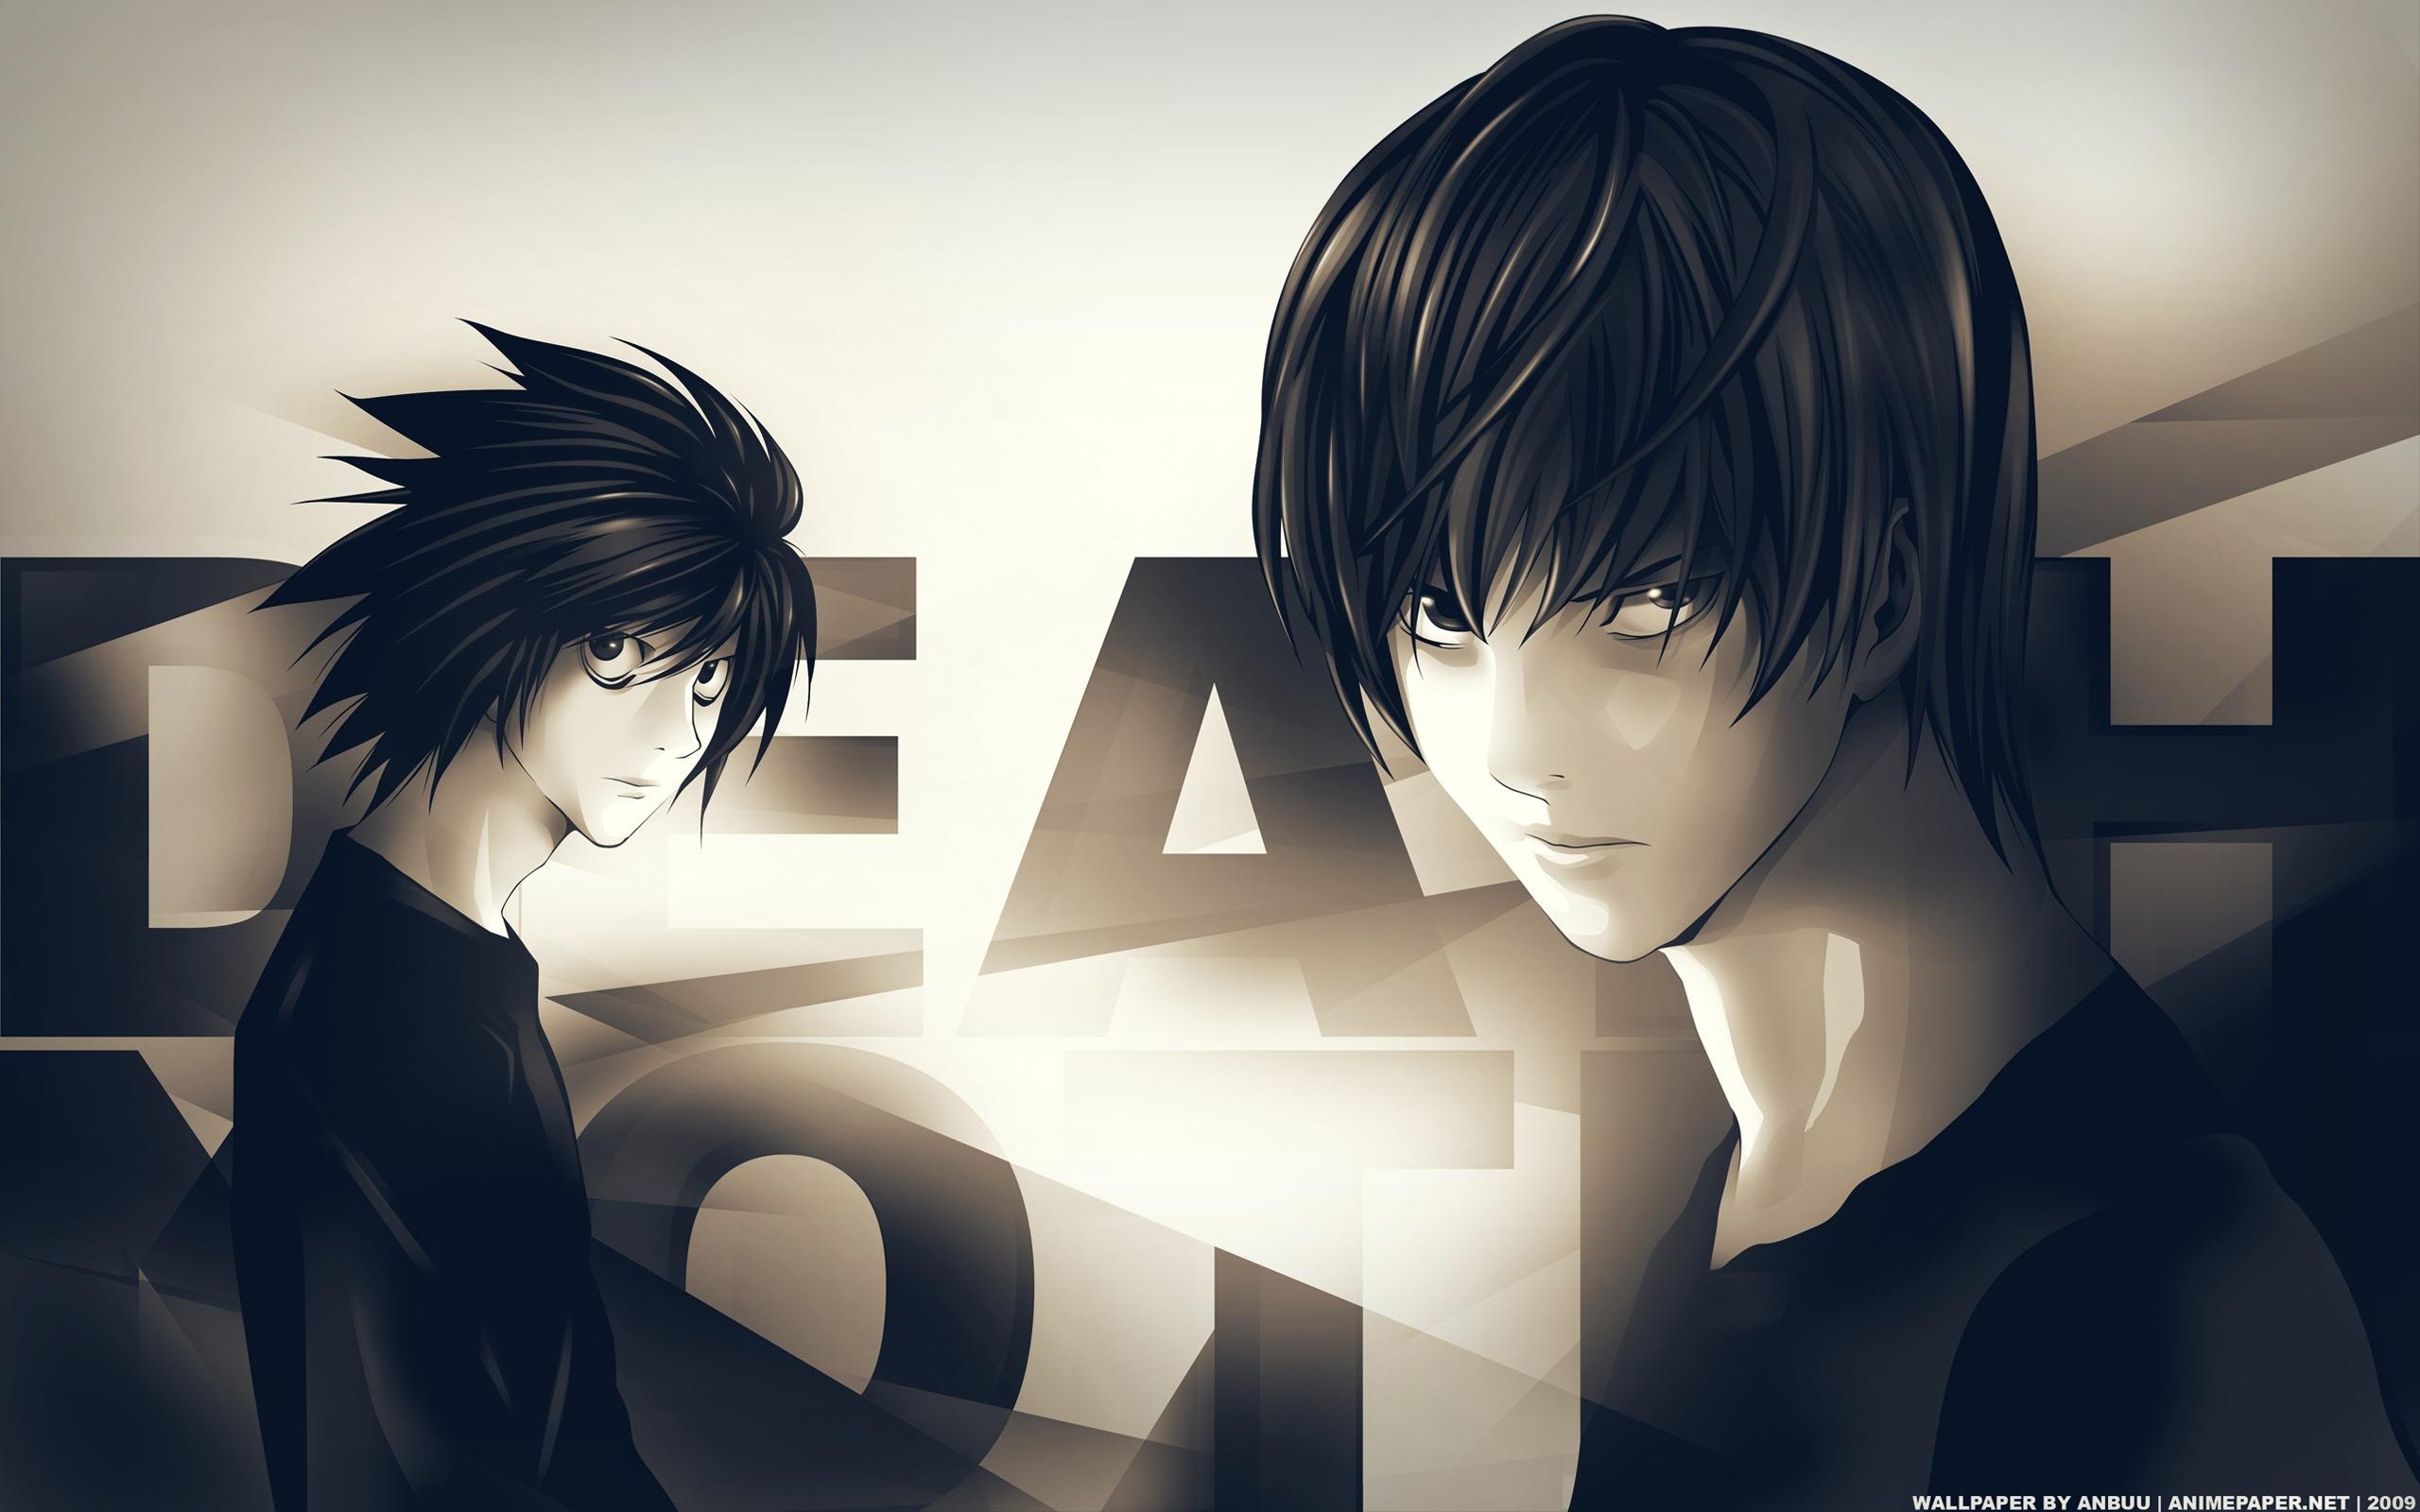 Animated characters Light Yagami and L from Death Note engaged in intense confrontation.